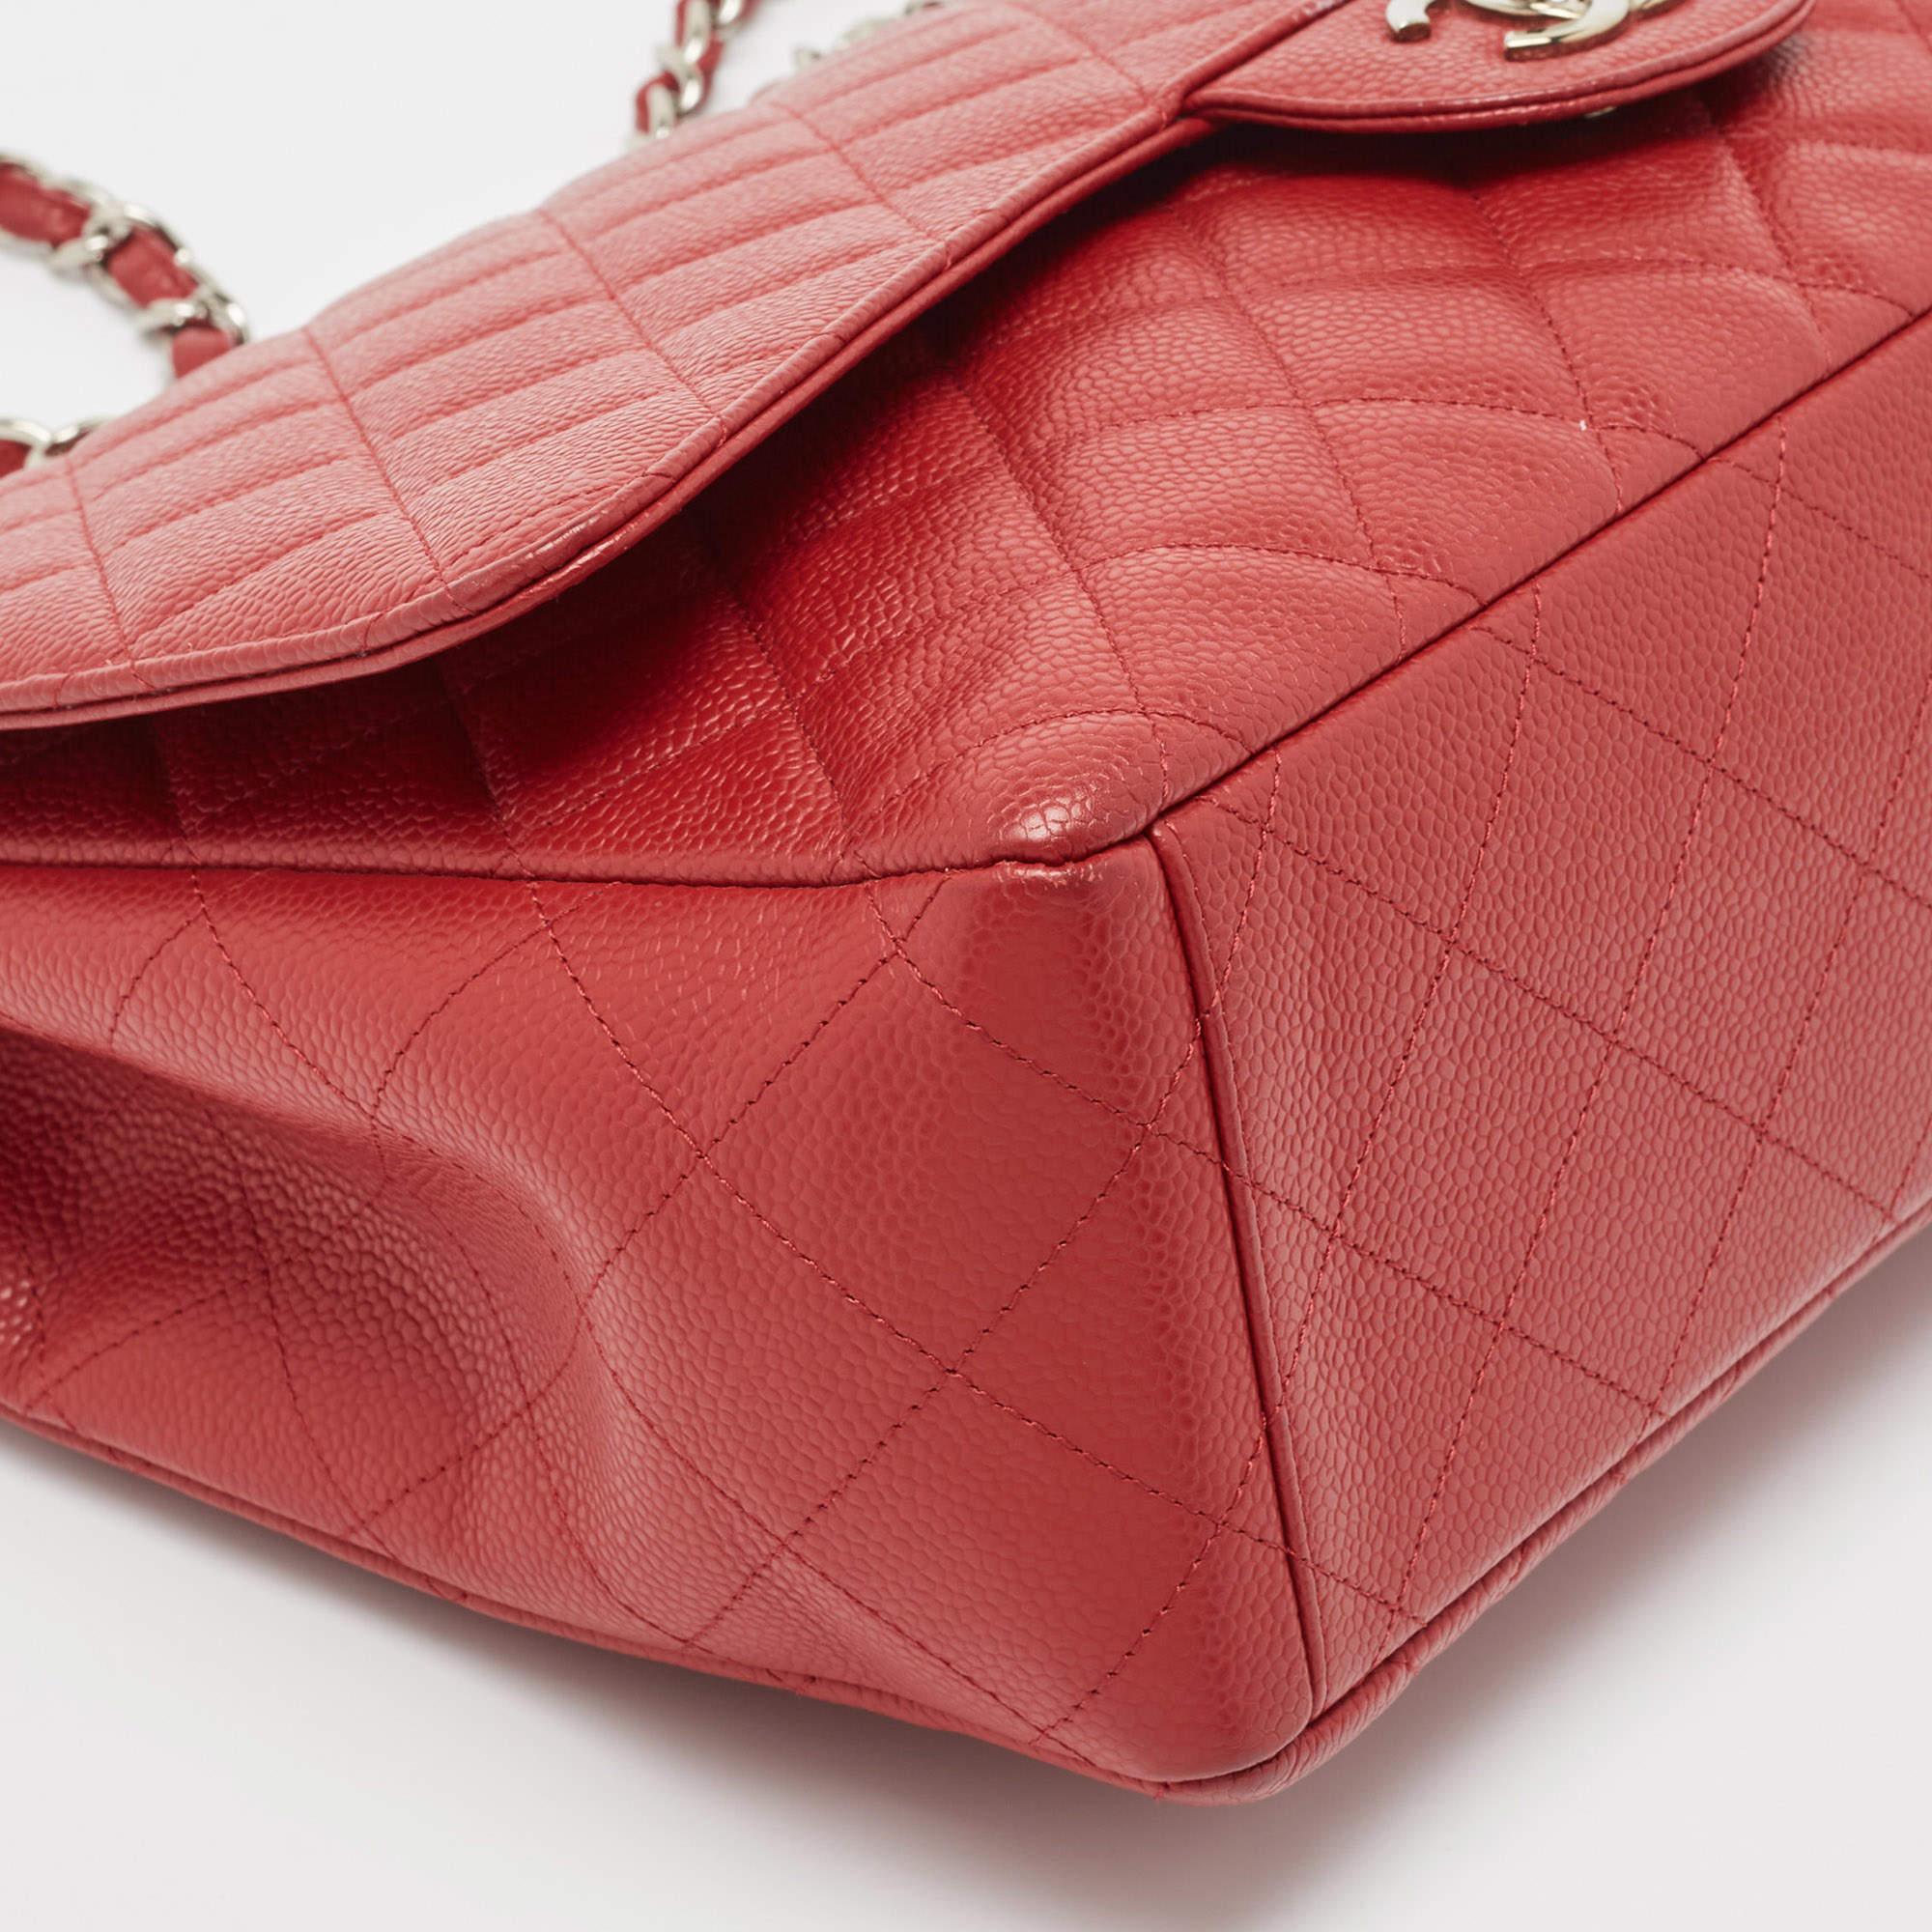 Chanel Red Caviar Leather Maxi Classic Double Flap Bag 10